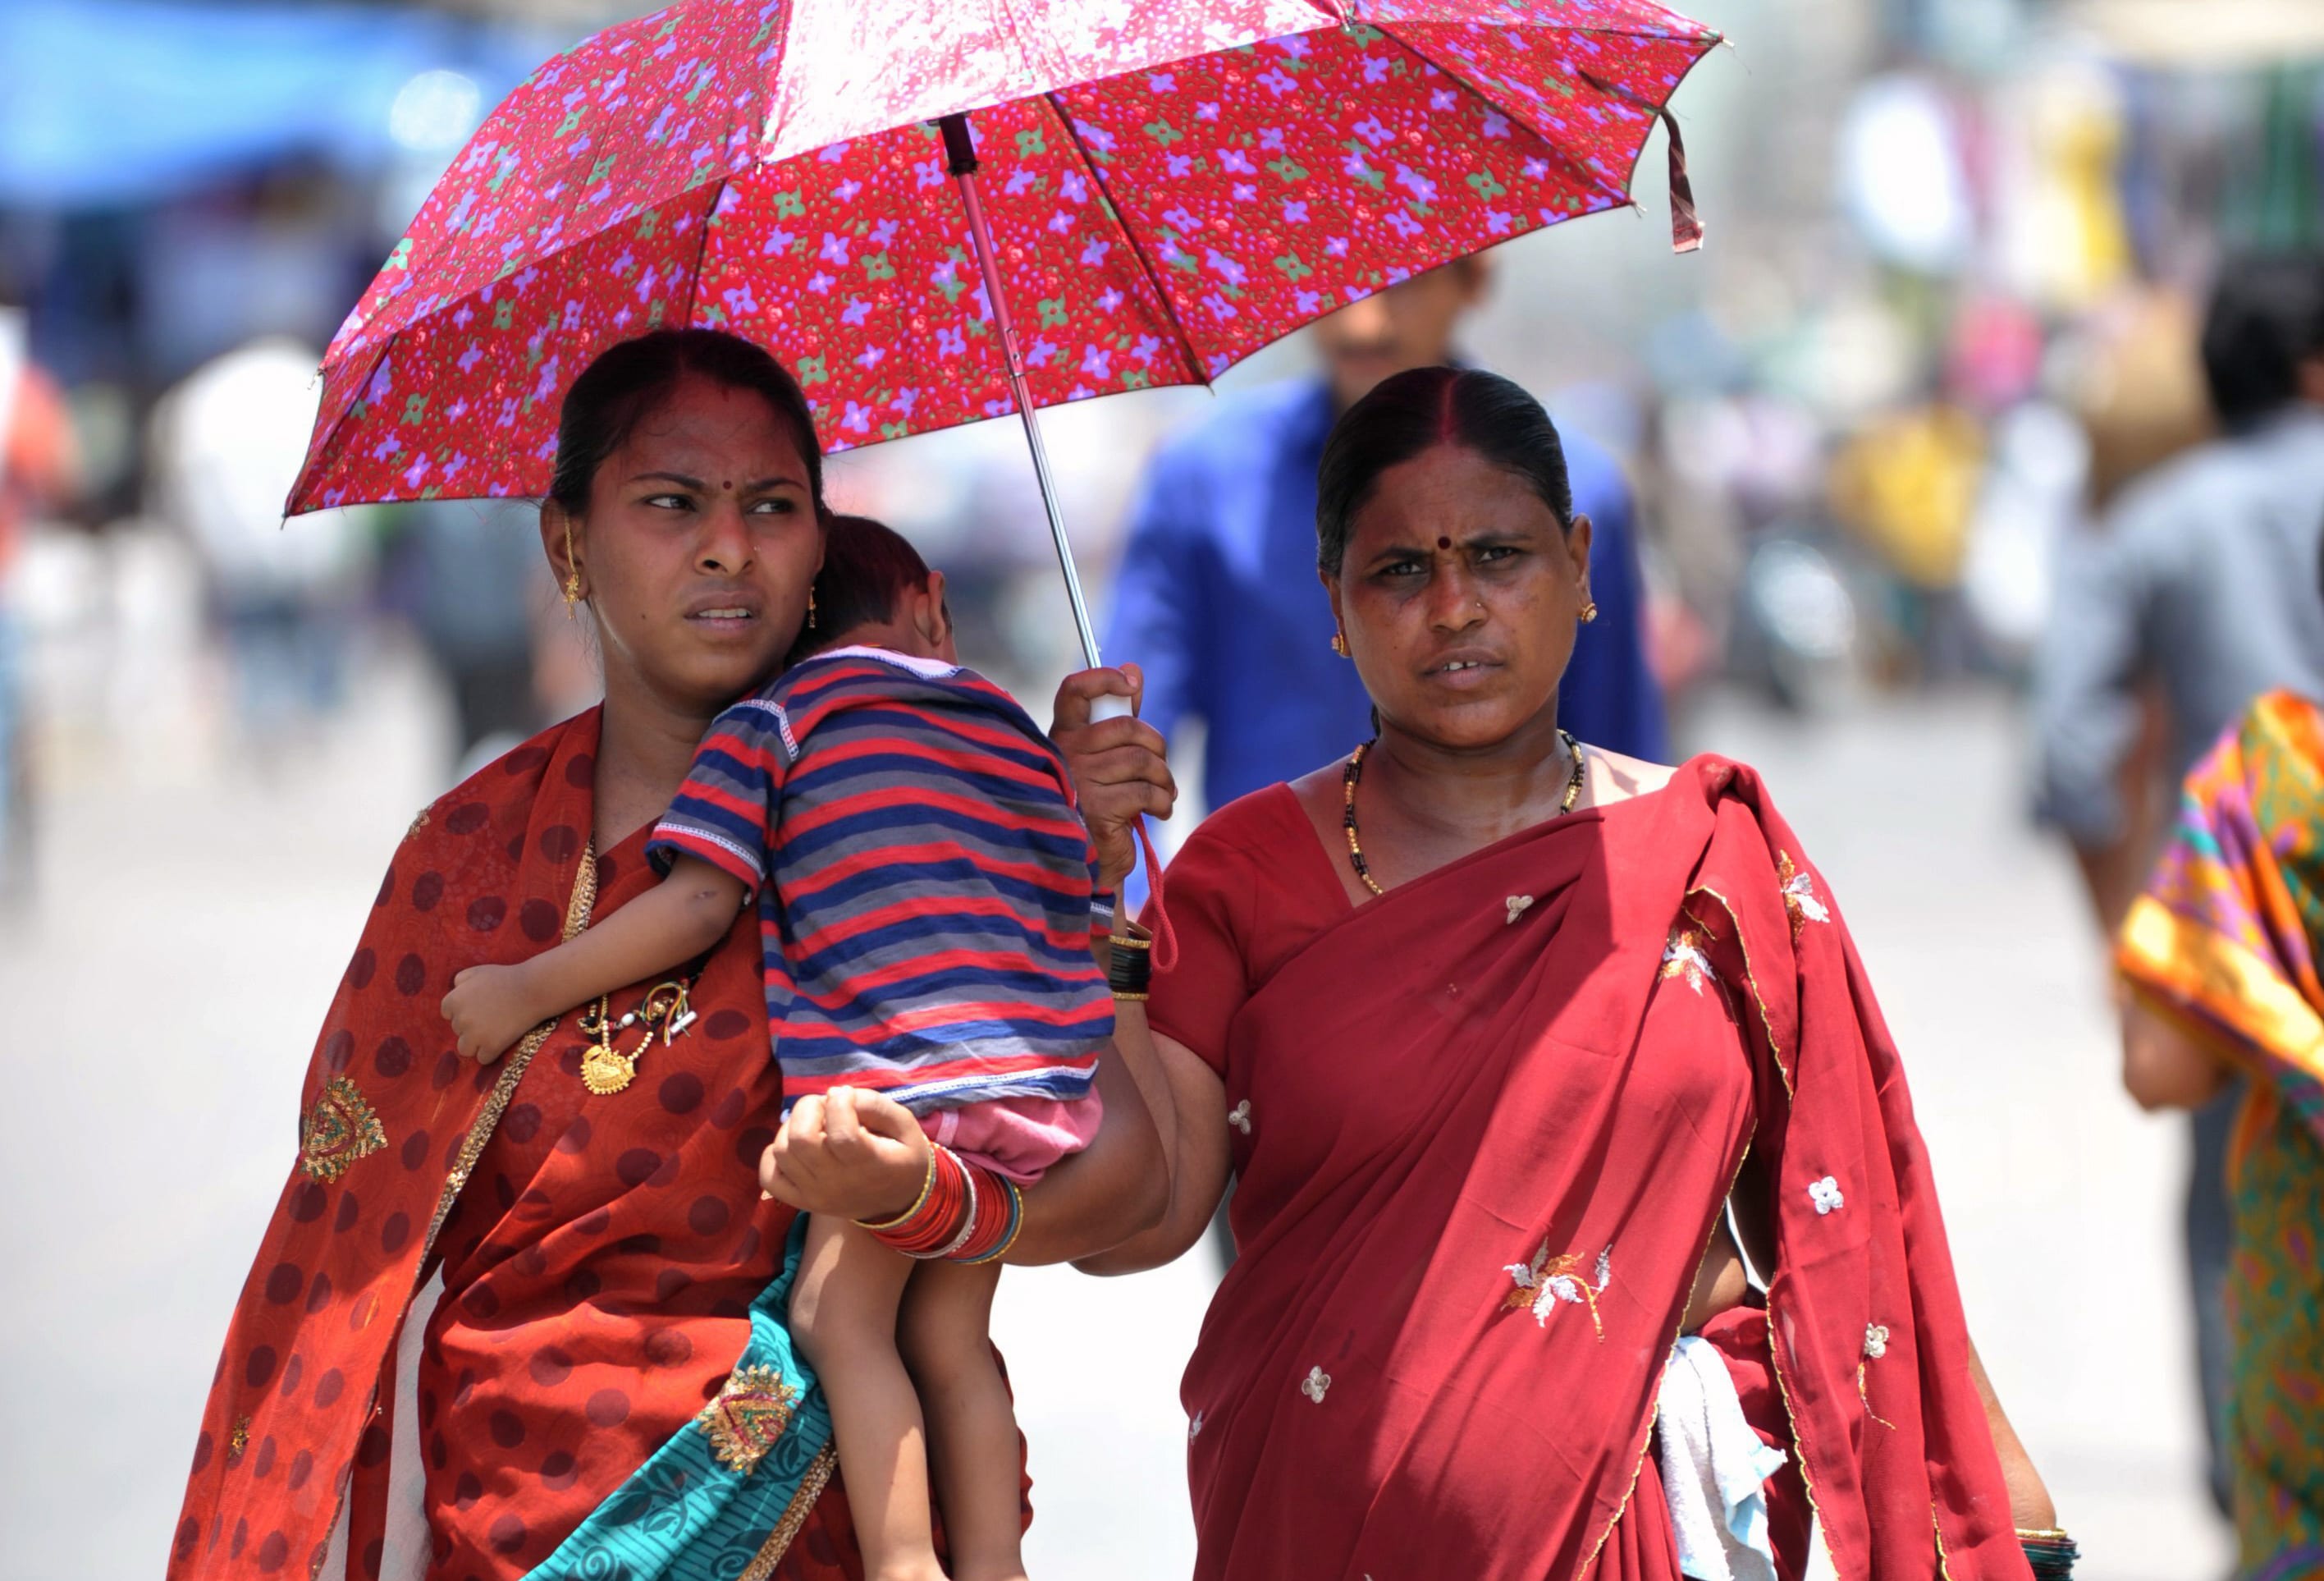 Two women and a child shelter under an umbrella in Hyderabad on Monday.